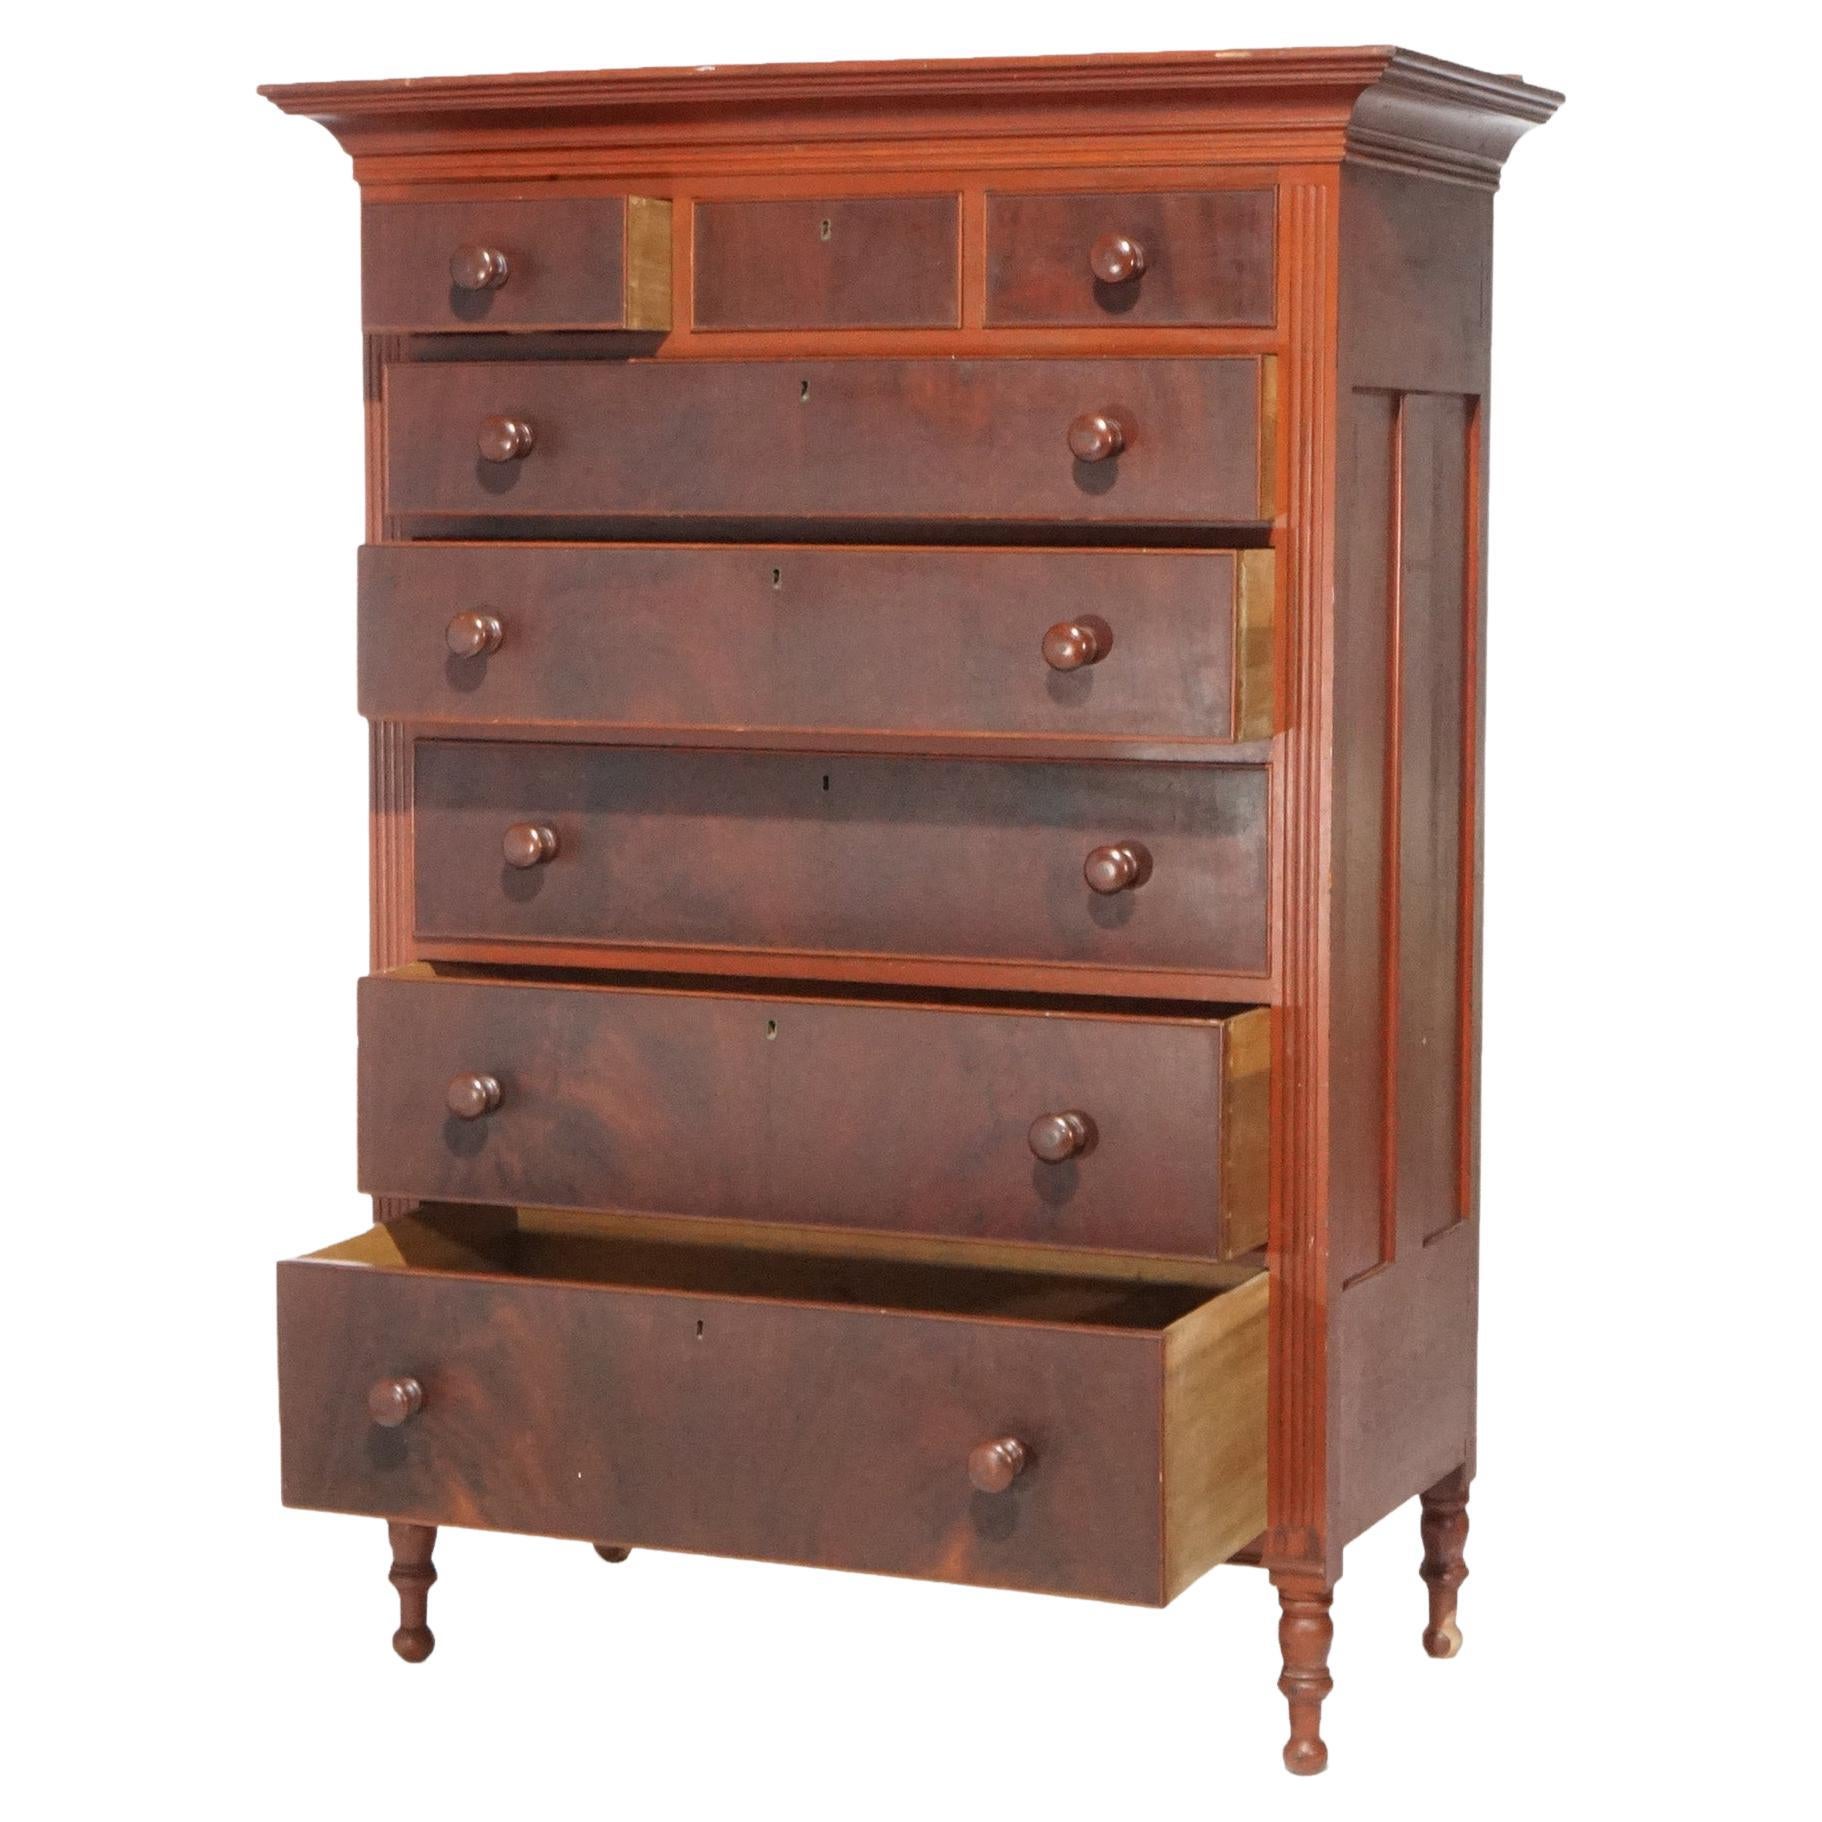 An antique Sheraton tall chest offers softwood paneled construction with faux painted drawers, raised on turned legs, c1830

Measures - 67